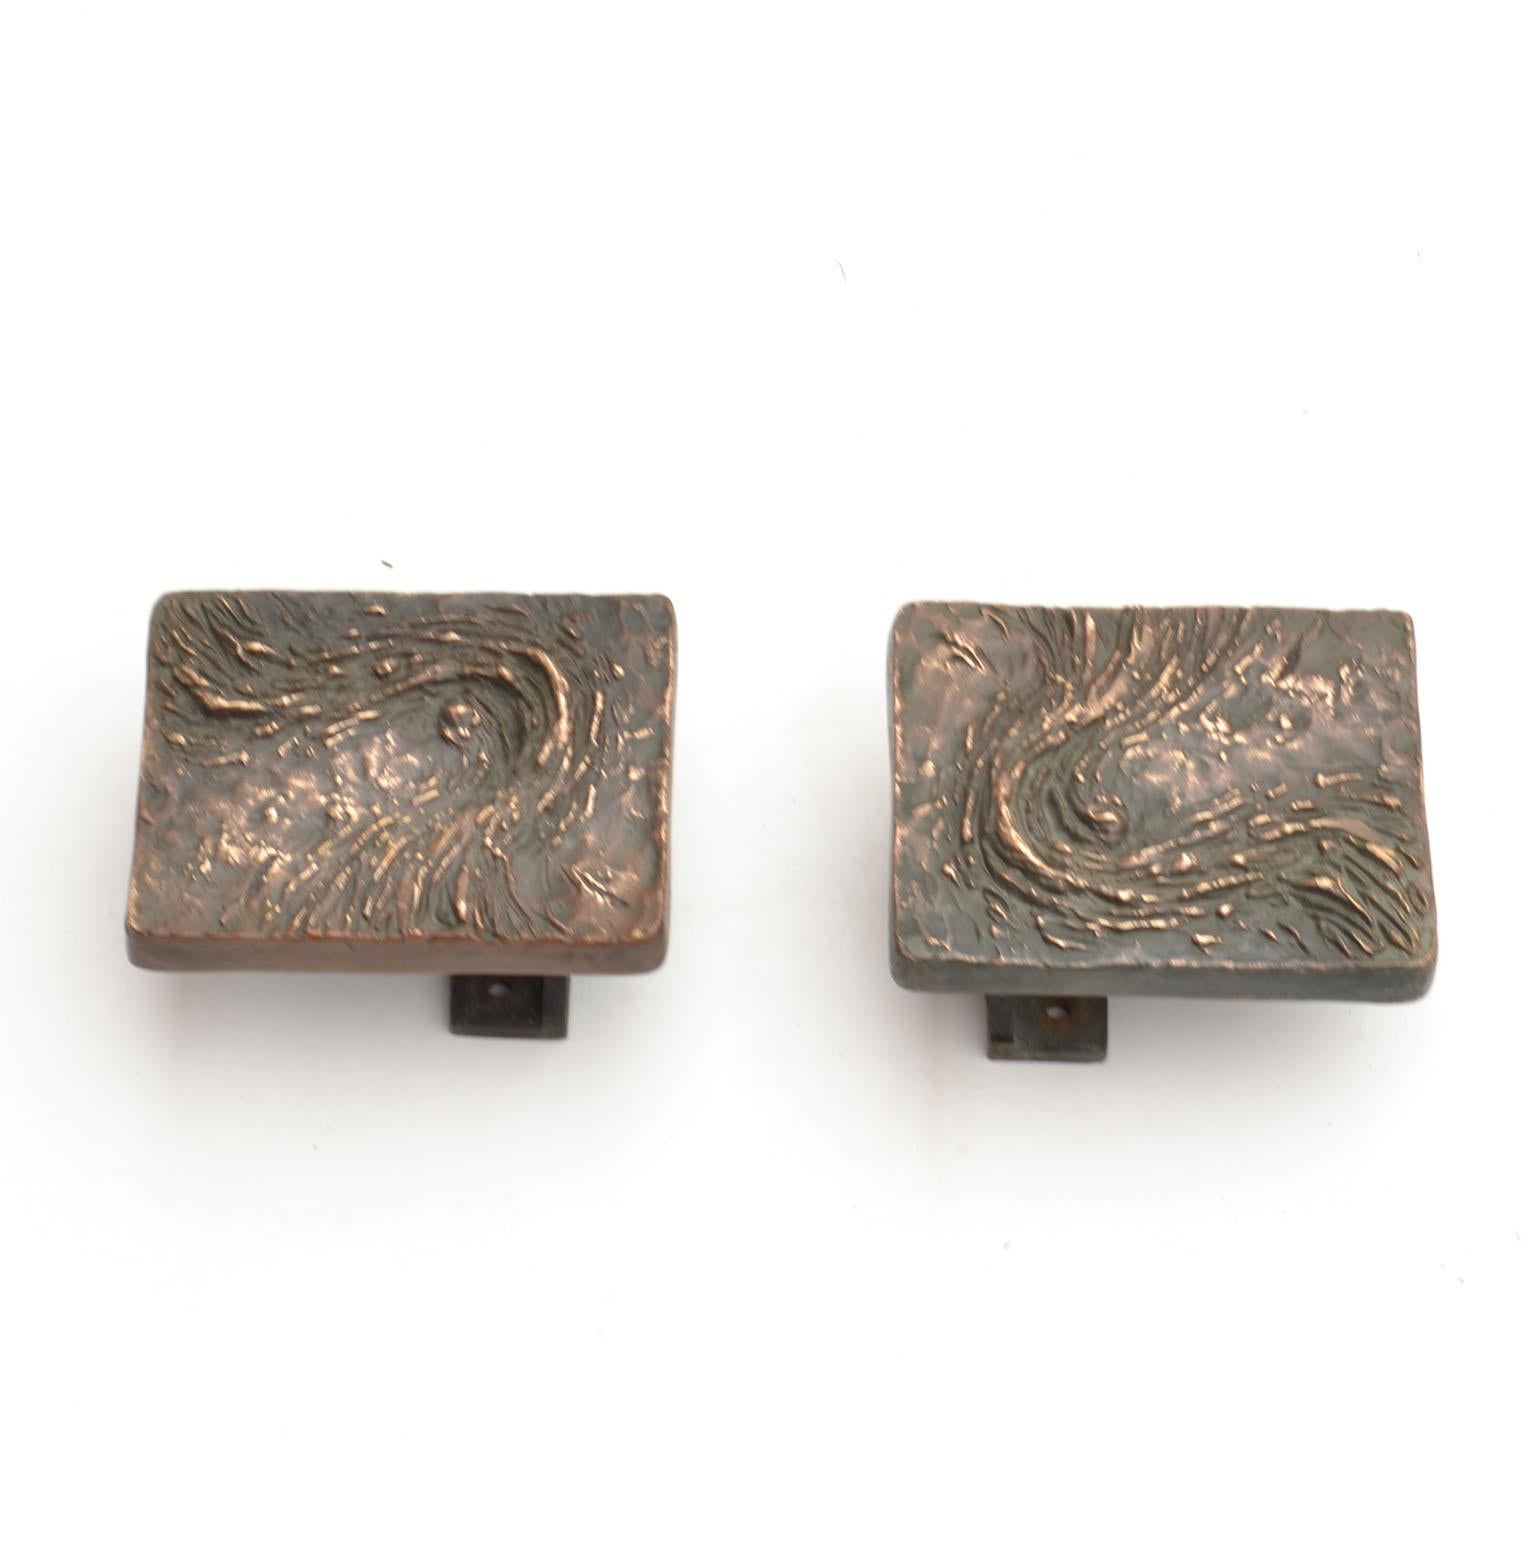 A set of three double push and pull square door handles with abstract relief. They are unused bronze door handles with an abstract textured motif, produced in the 1970's, the bright patina enhances the expressive relief. 
The identical handles can